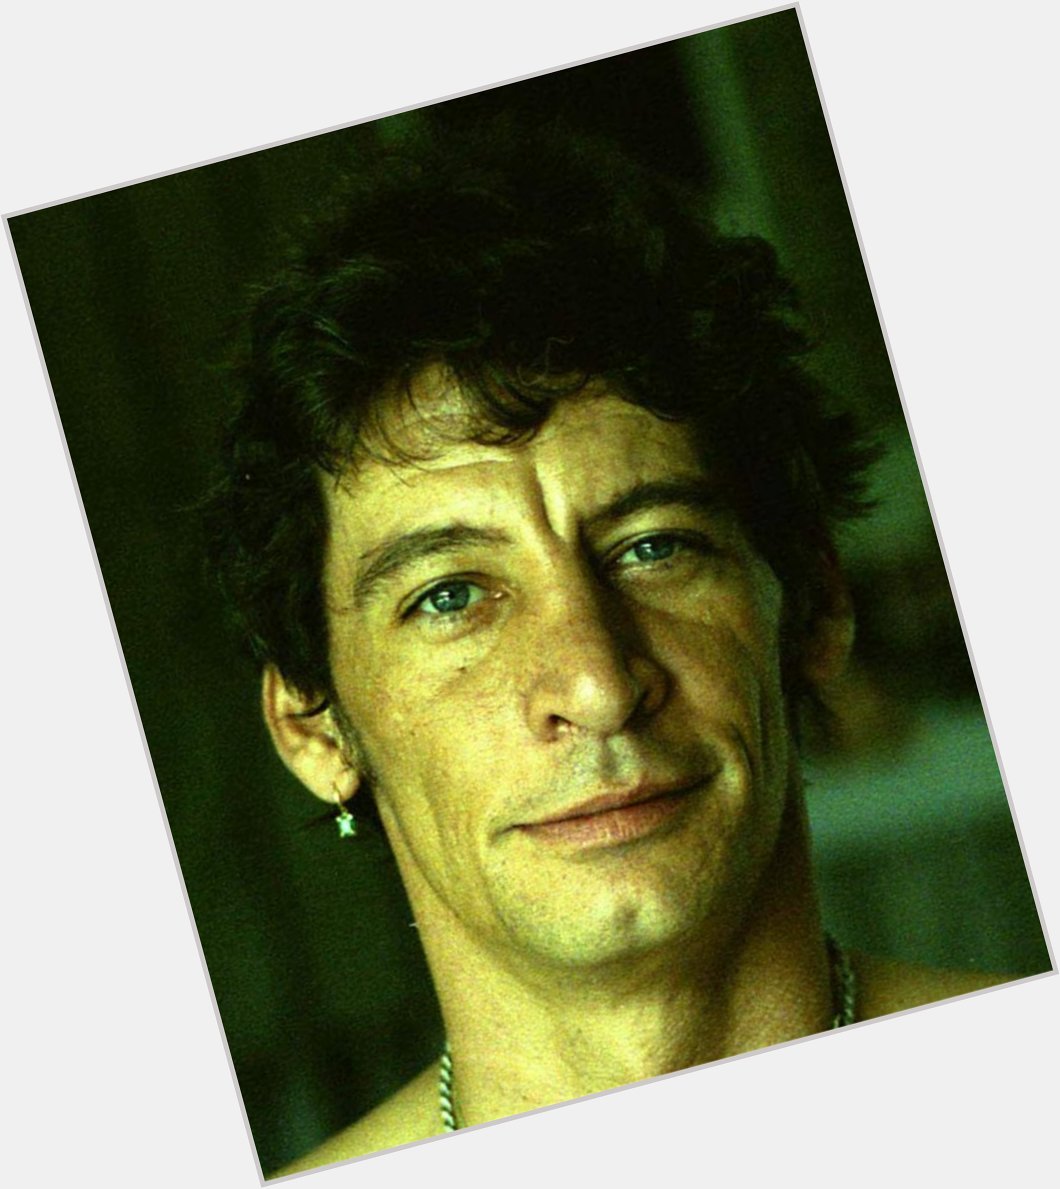 Happy Birthday to the late Jim Varney

When he wasn\t playing Ernest, he was extremely sexy! 